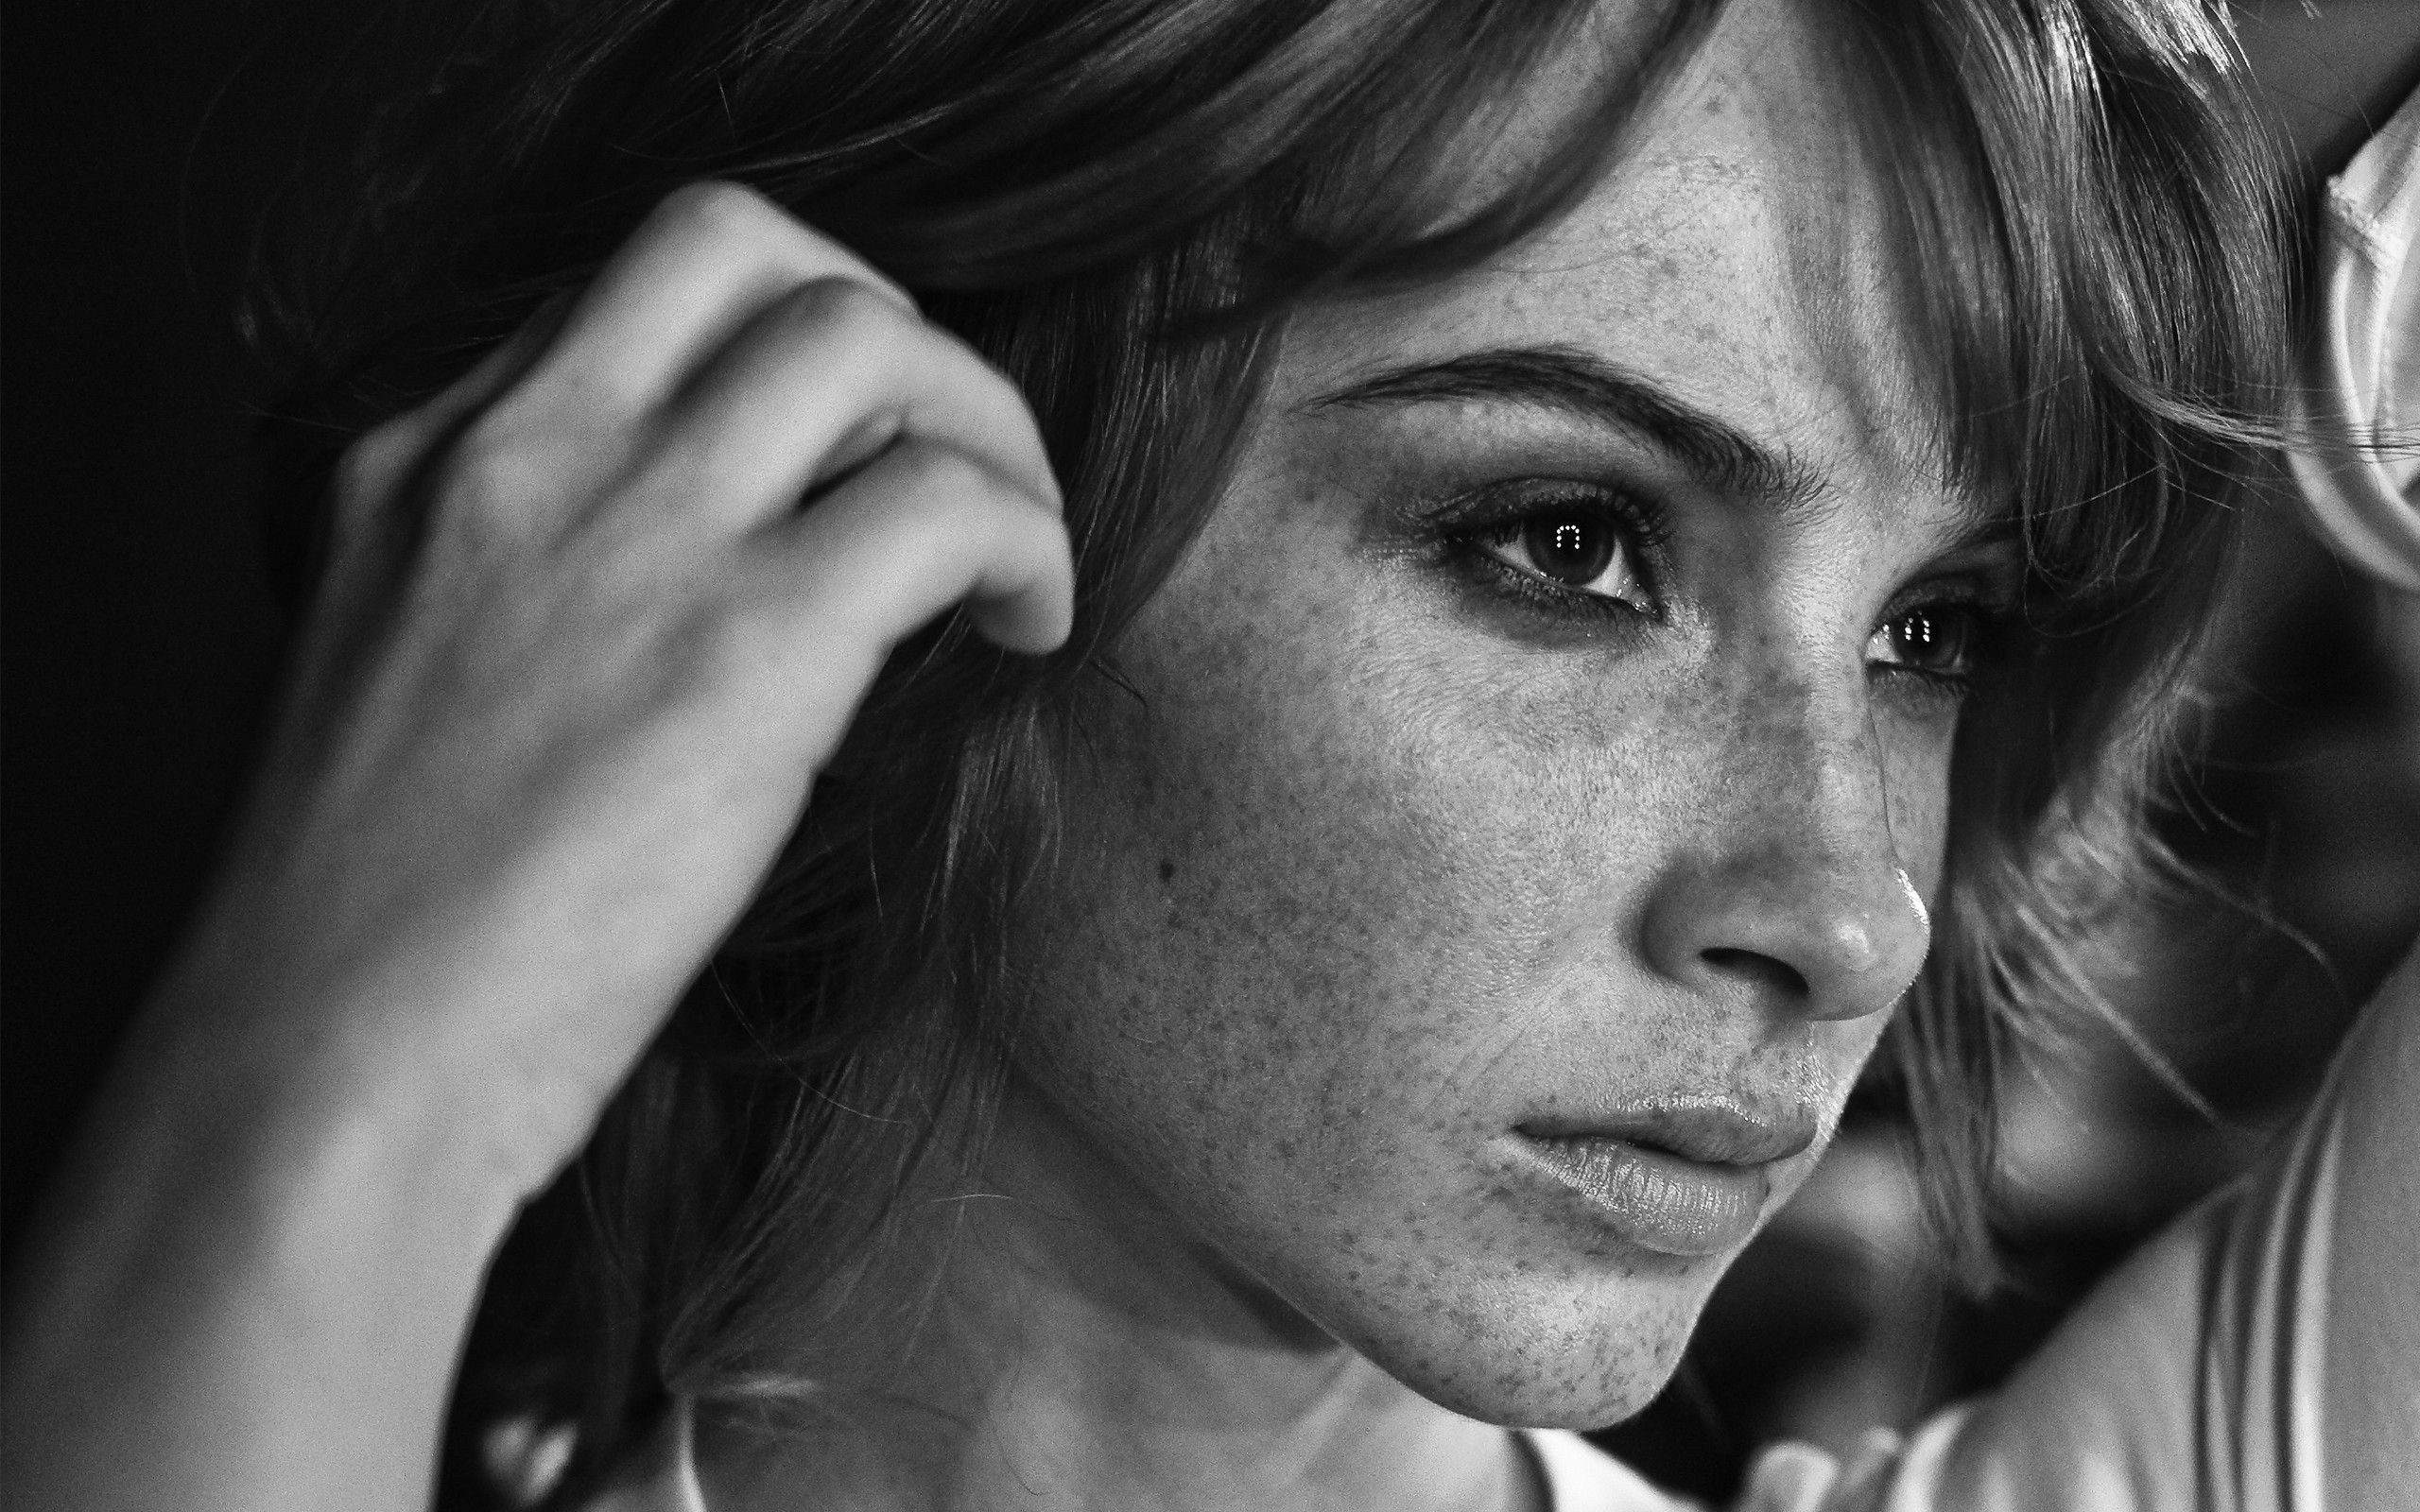 Wallpaper, girl, freckles, face, black and white 2560x1600